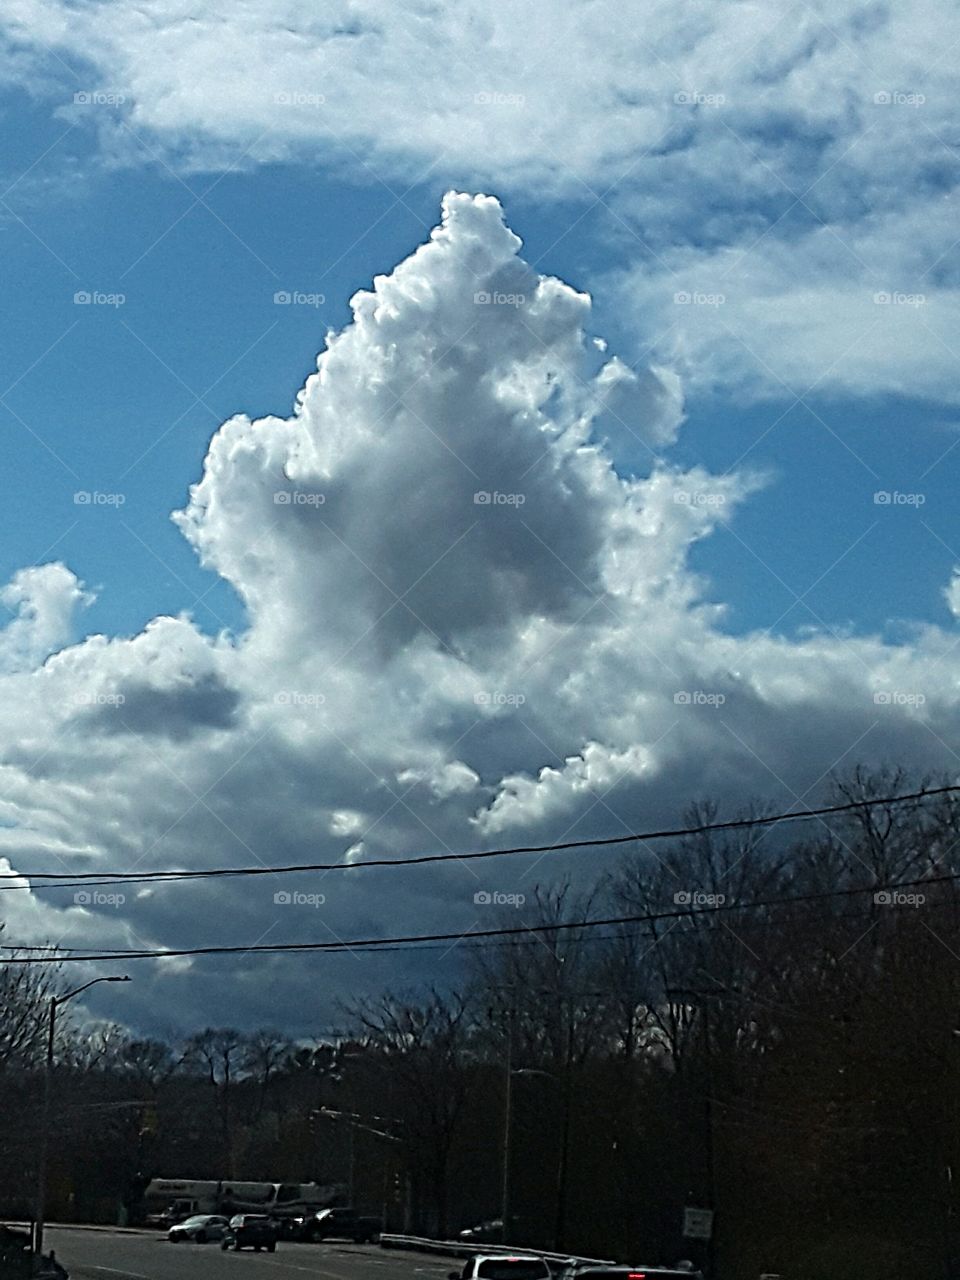 Incredible Cloud Formations over Boston...